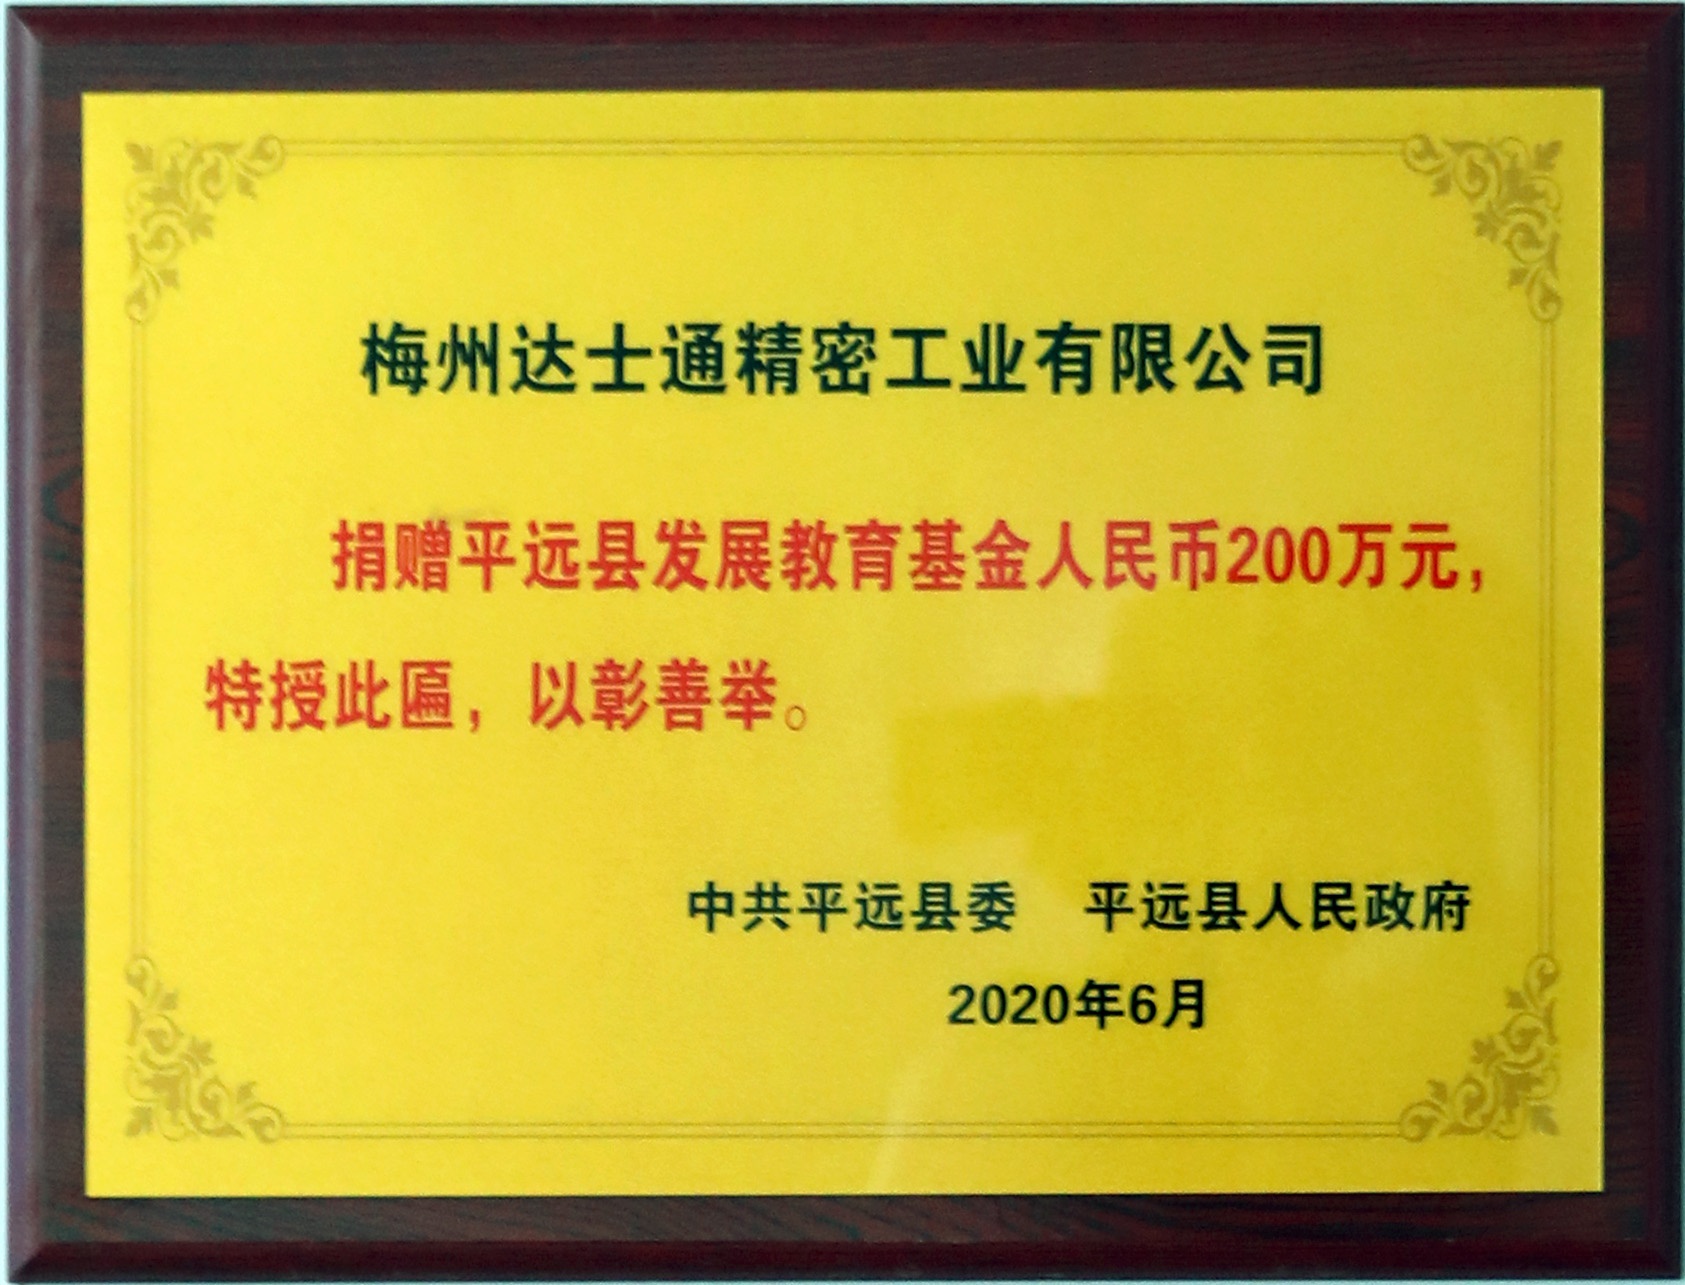 Donated to Pingyuan County Development Education Fund